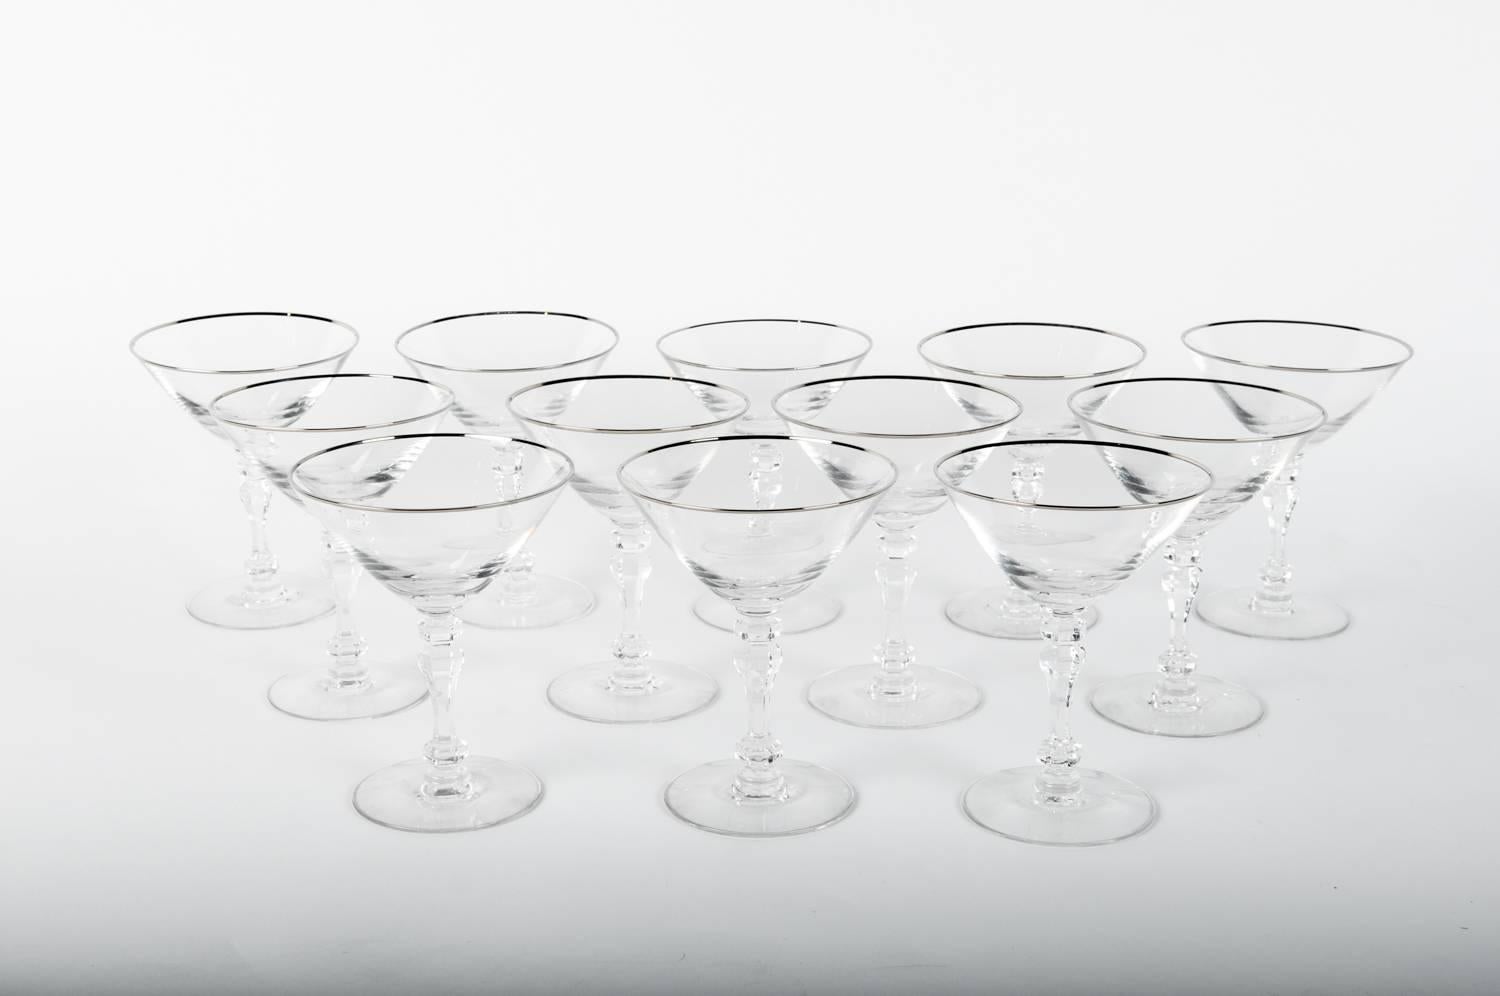 Vintage set of 8 crystal champagne coupes or martini or cocktail with platinum trimmed top. Excellent condition. Each coupe measure 5.5 inches high x 4.2 inches top diameter.